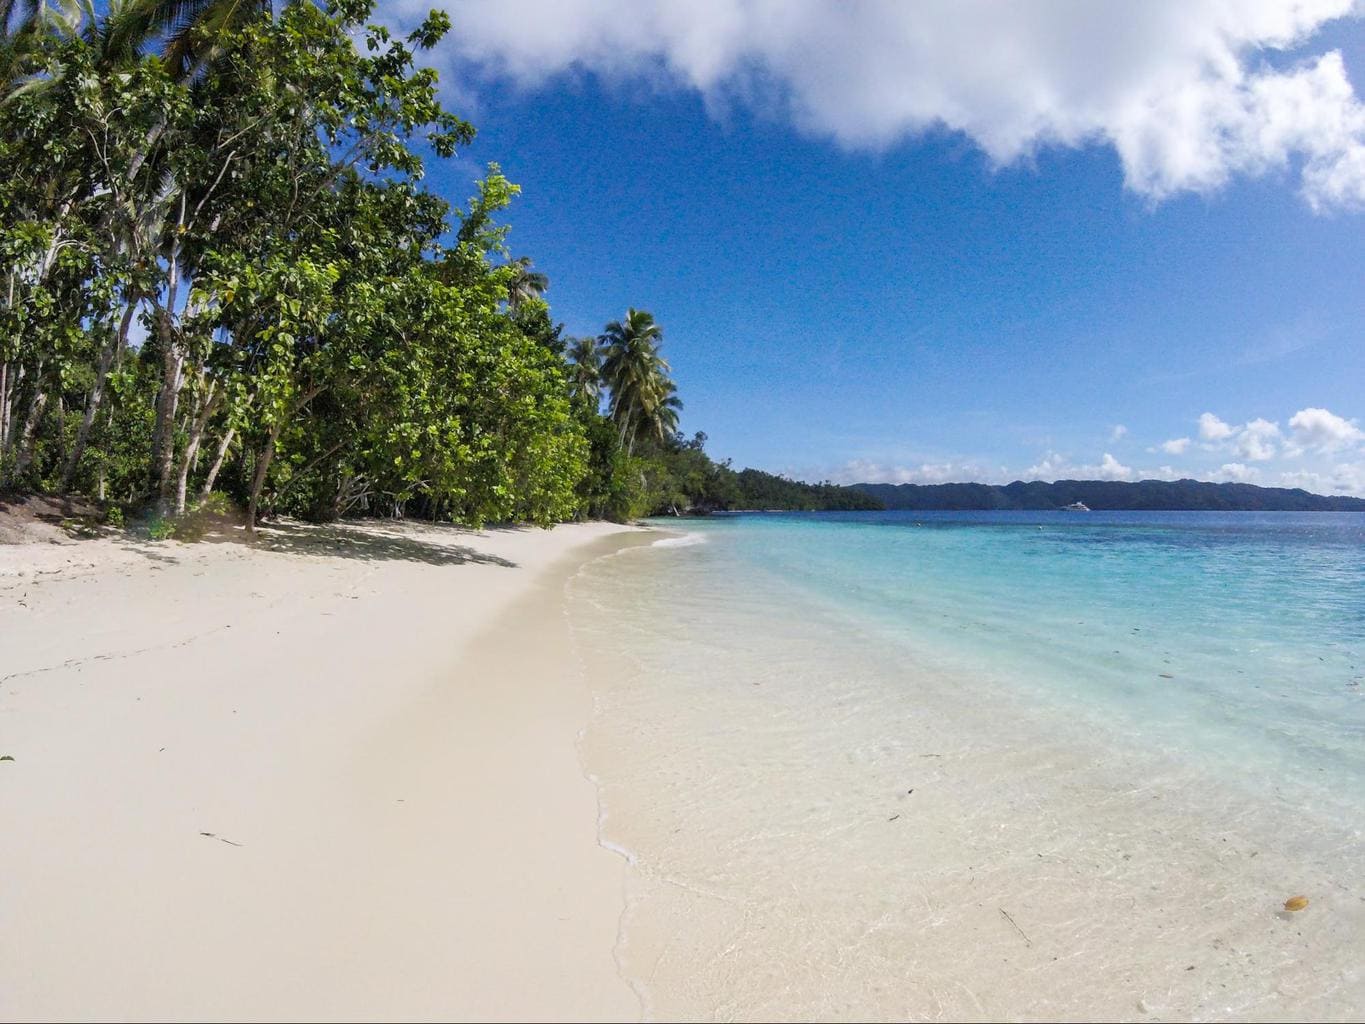 Gam Island in Raja Ampat, one of the most remote beaches in Indonesia